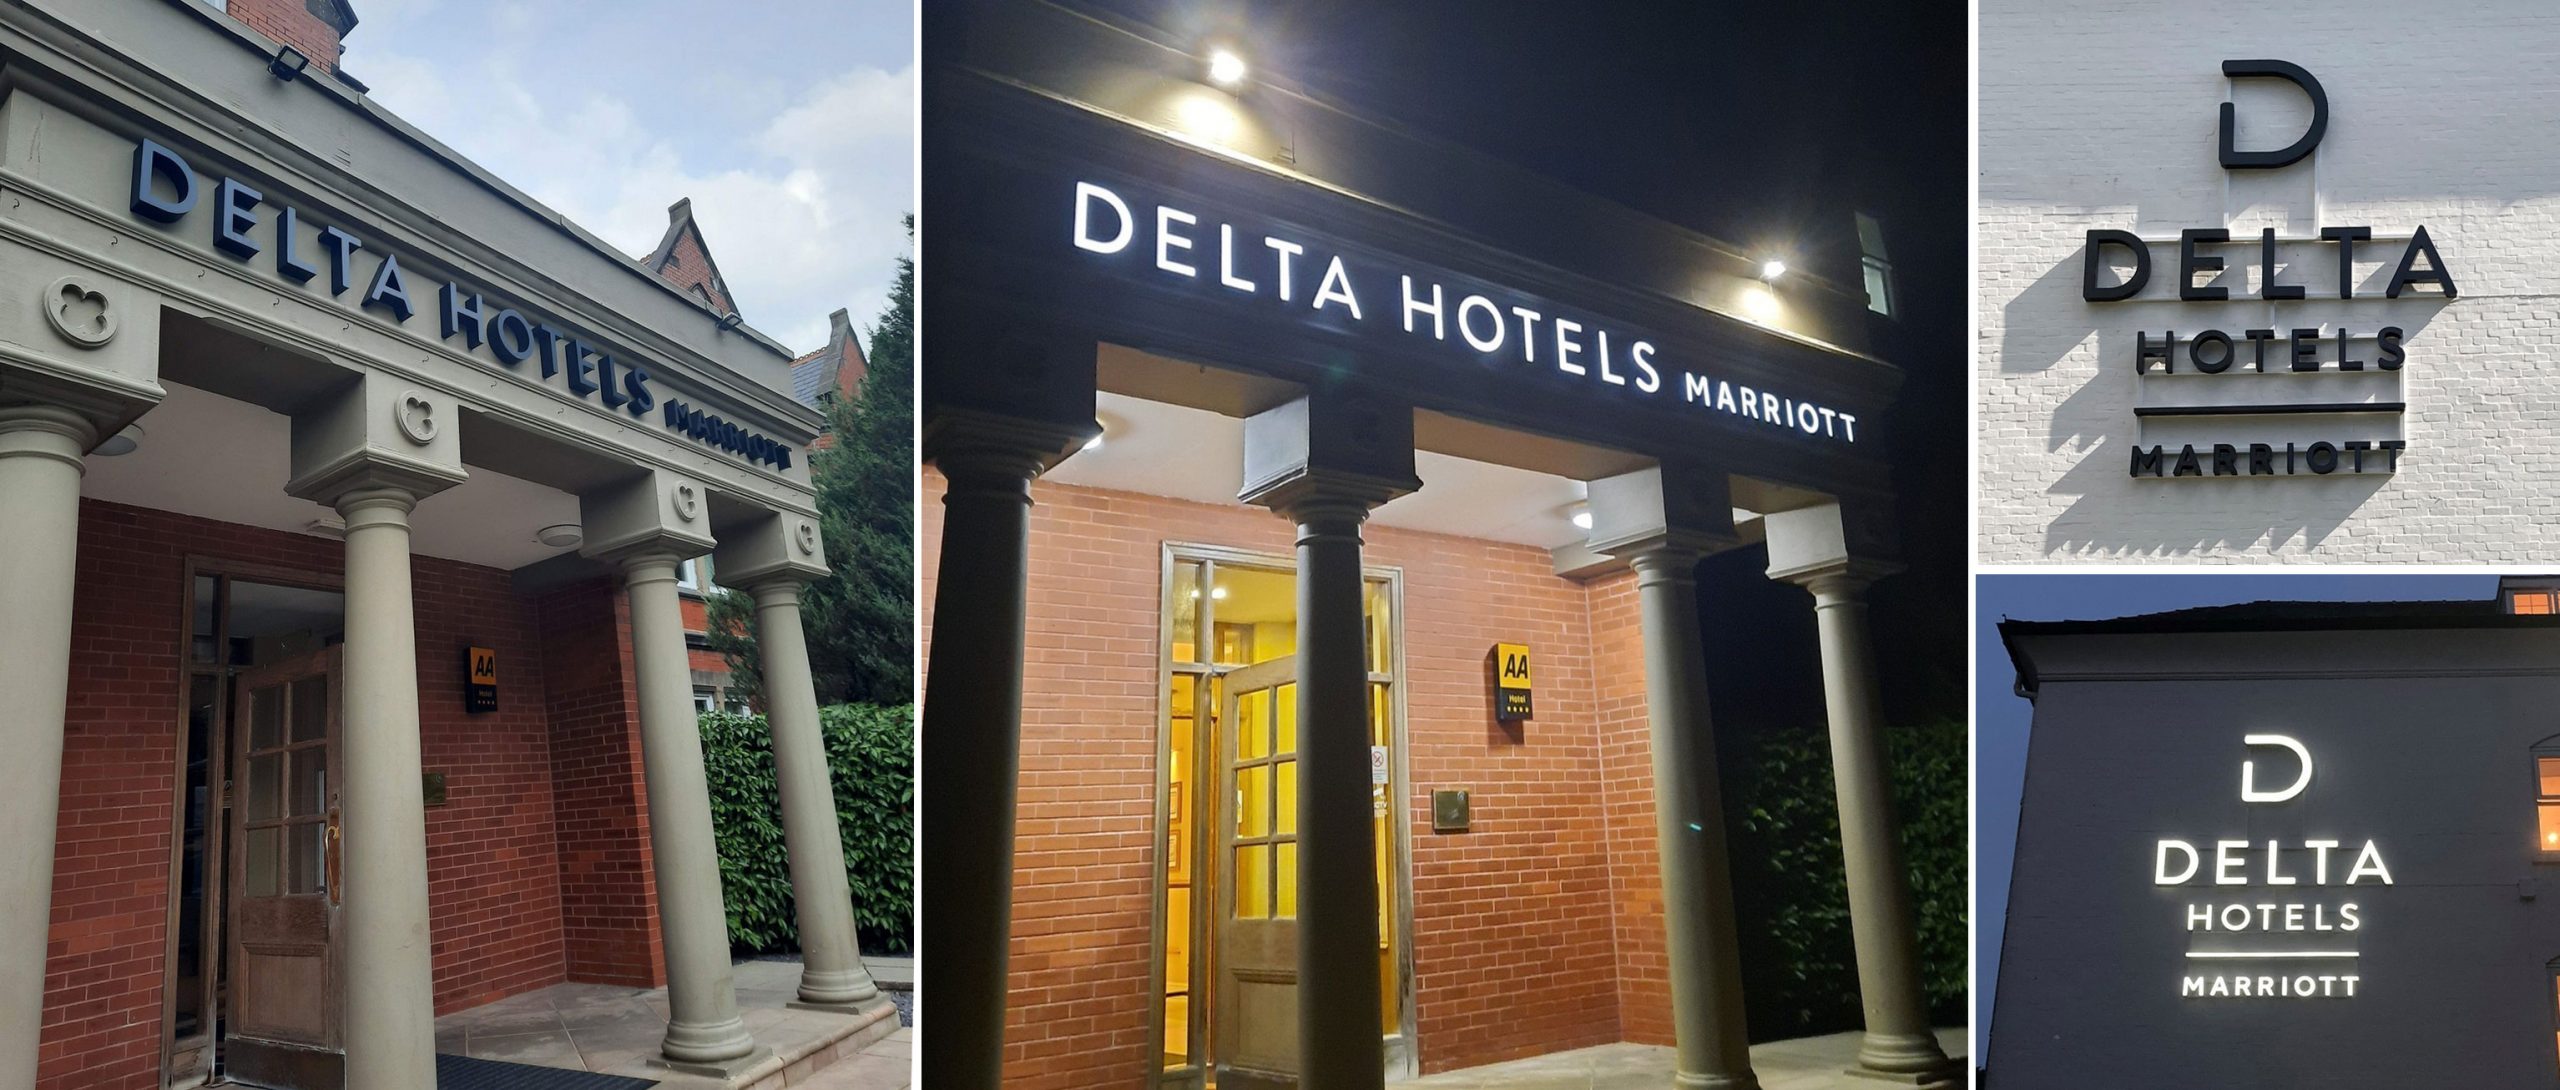 External signage for Delta Hotels rebrand by Astley